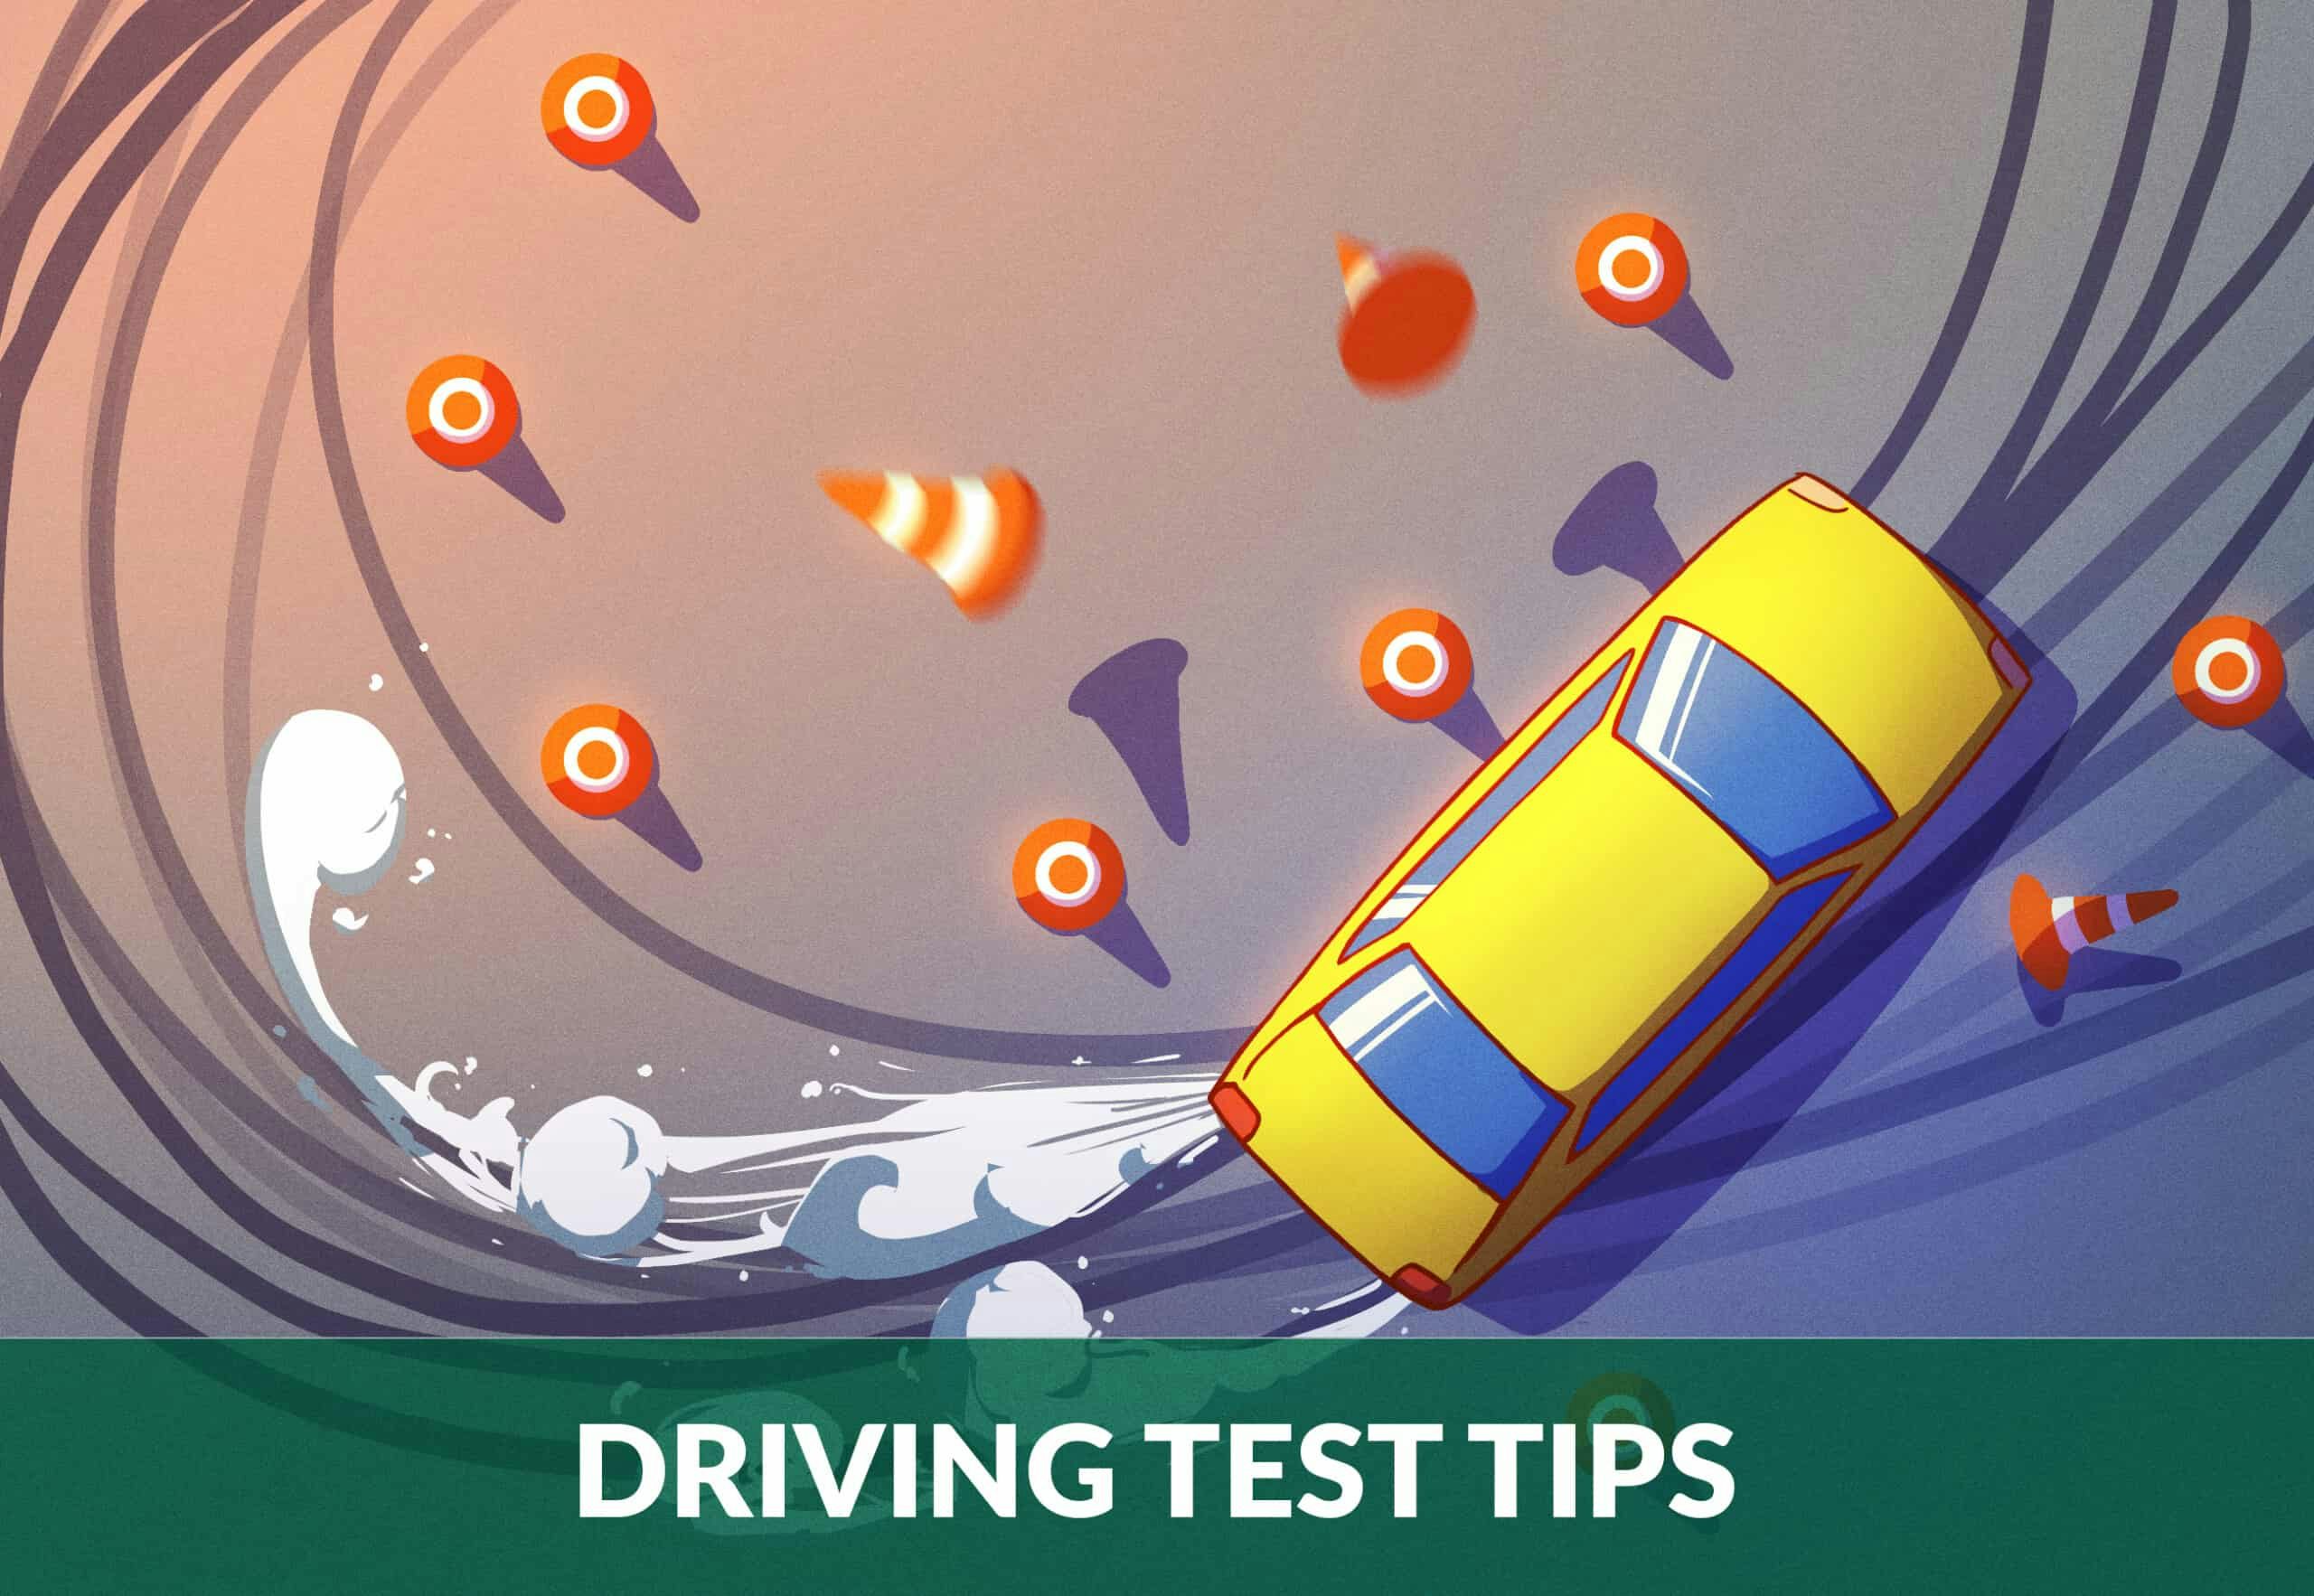 Driving test tips